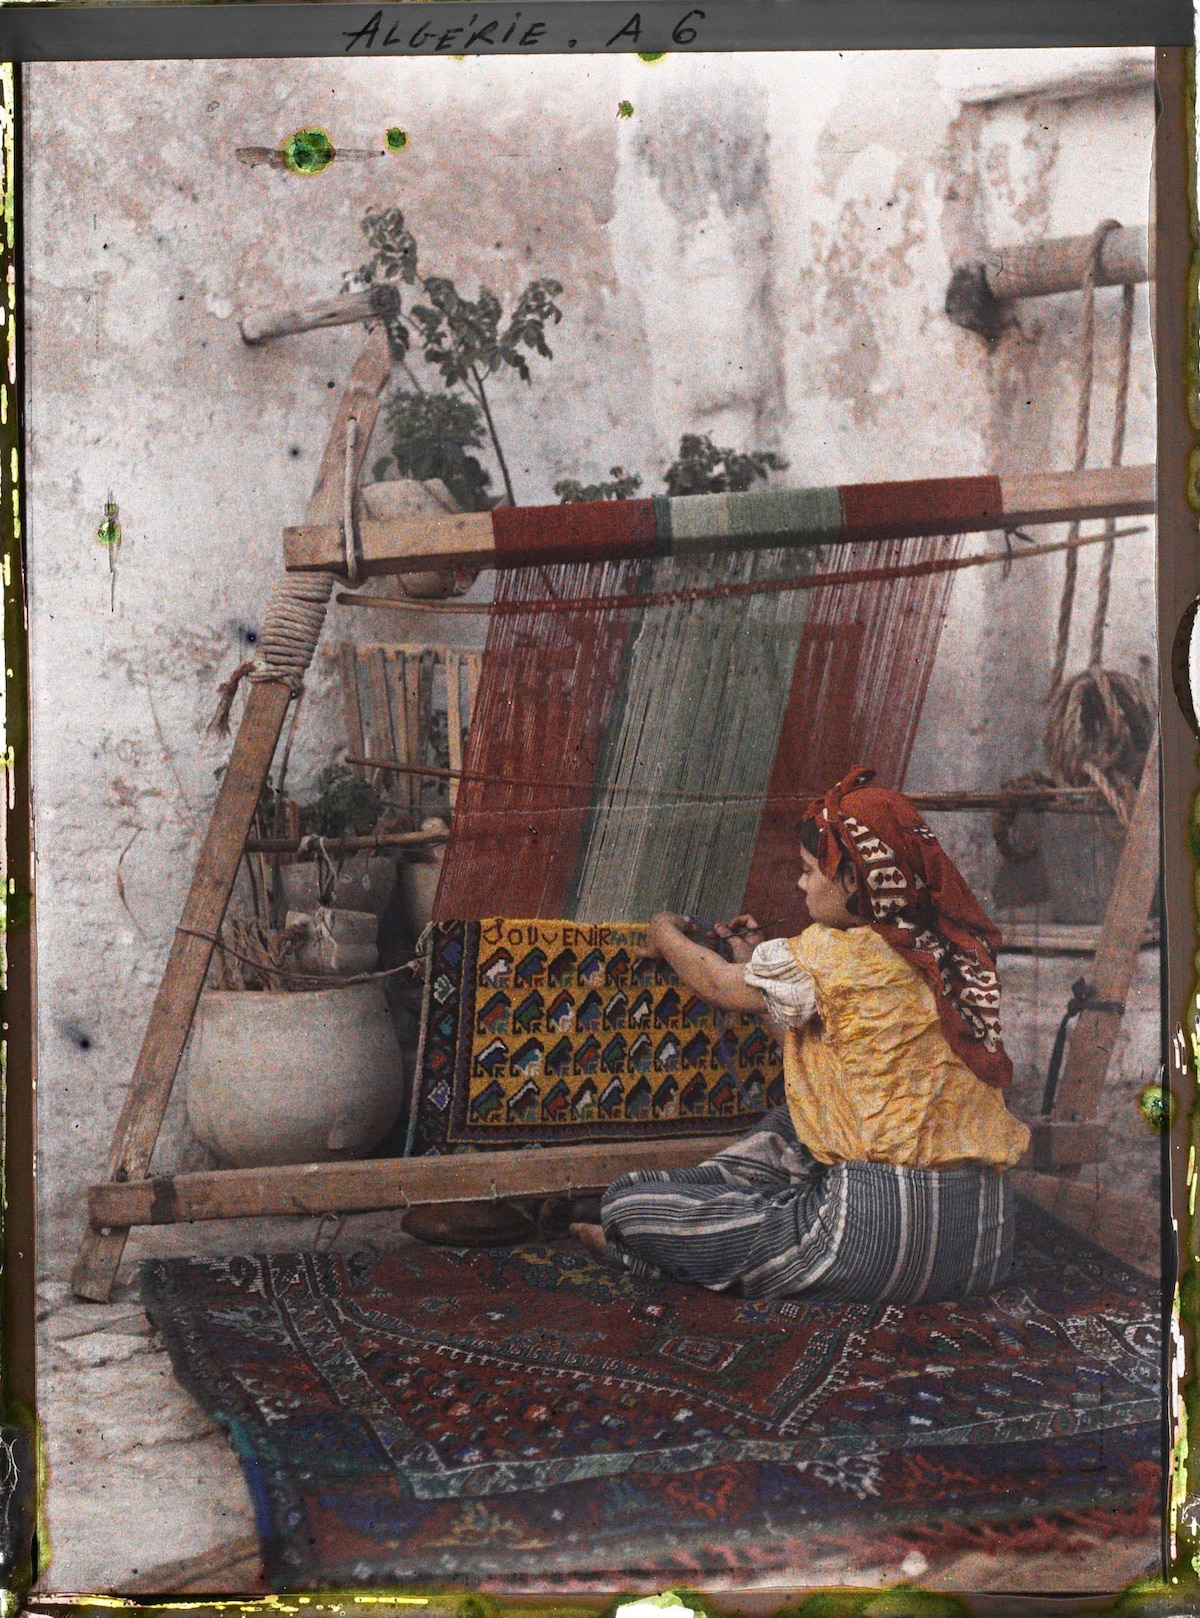 A young carpet weaver in front of her loom in Algiers, Algeria 